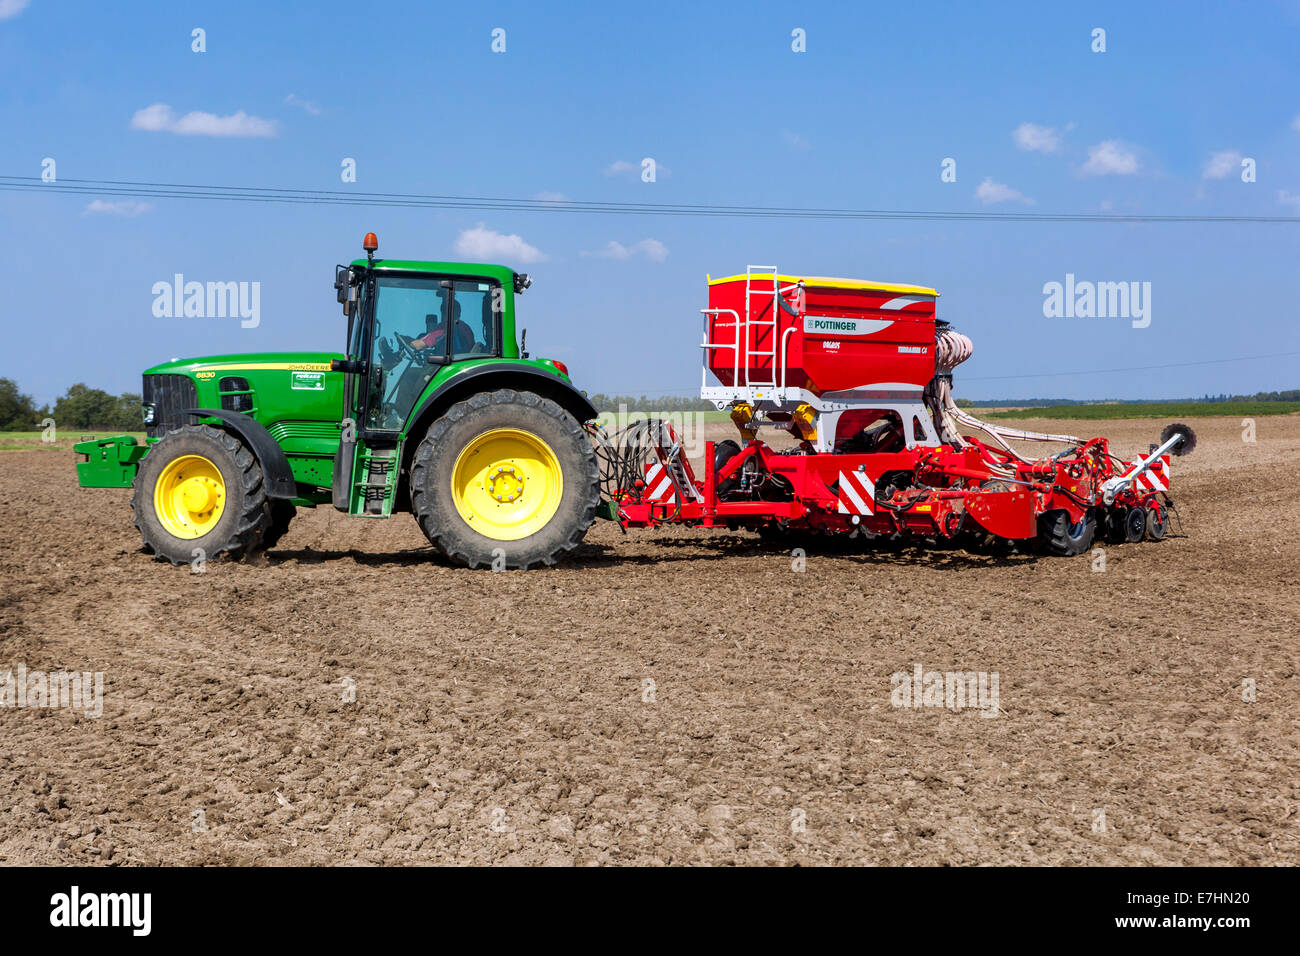 Seed drill tractor John Deere tractor sowing seeds wheat on a field Czech Republic farmer Stock Photo